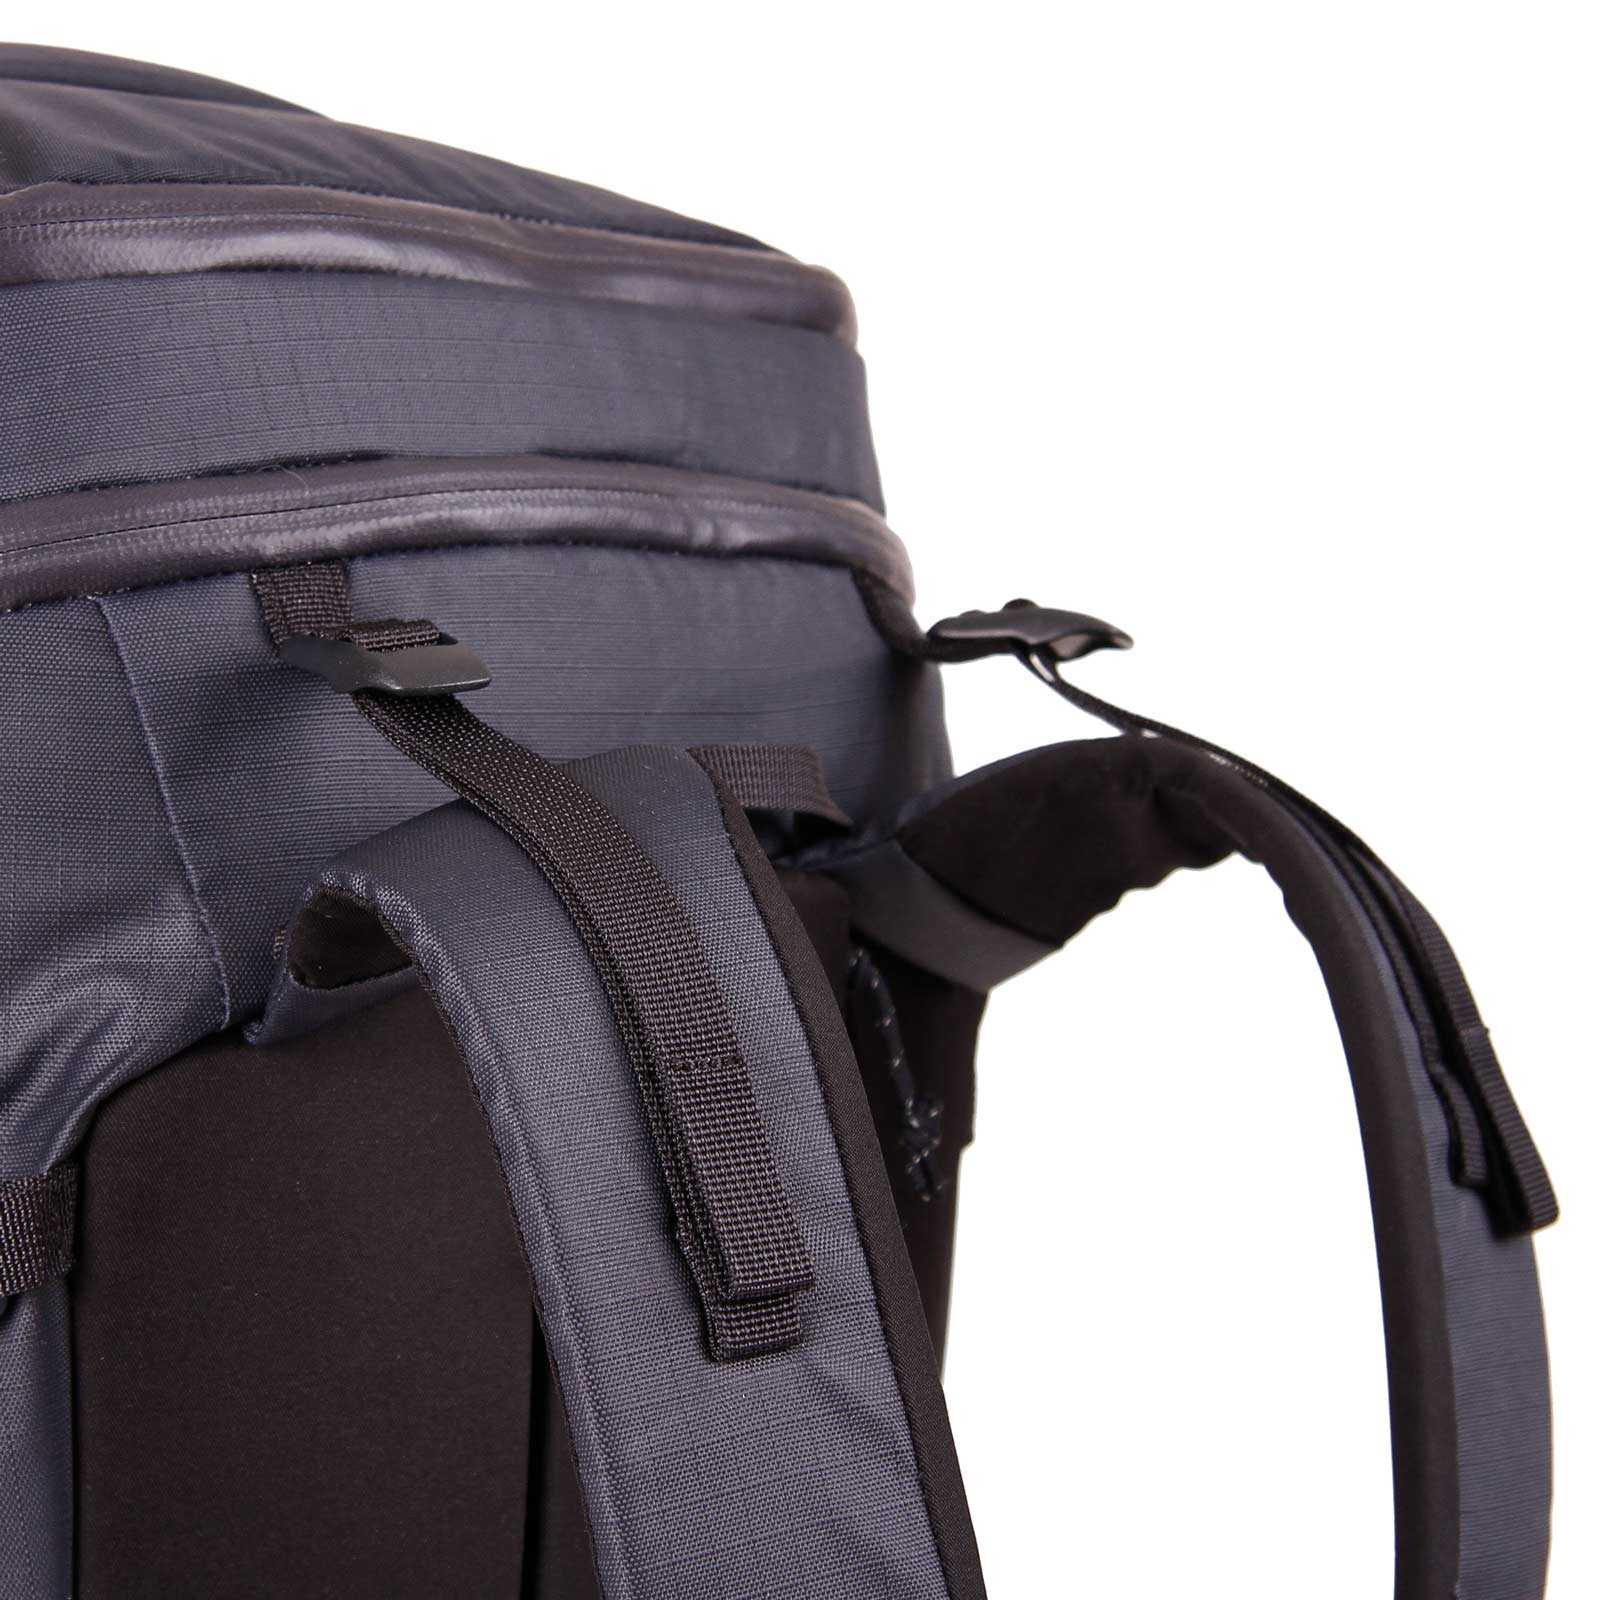 The Yagi 28L is a freeriding and ski touring backpack. Minimalist but